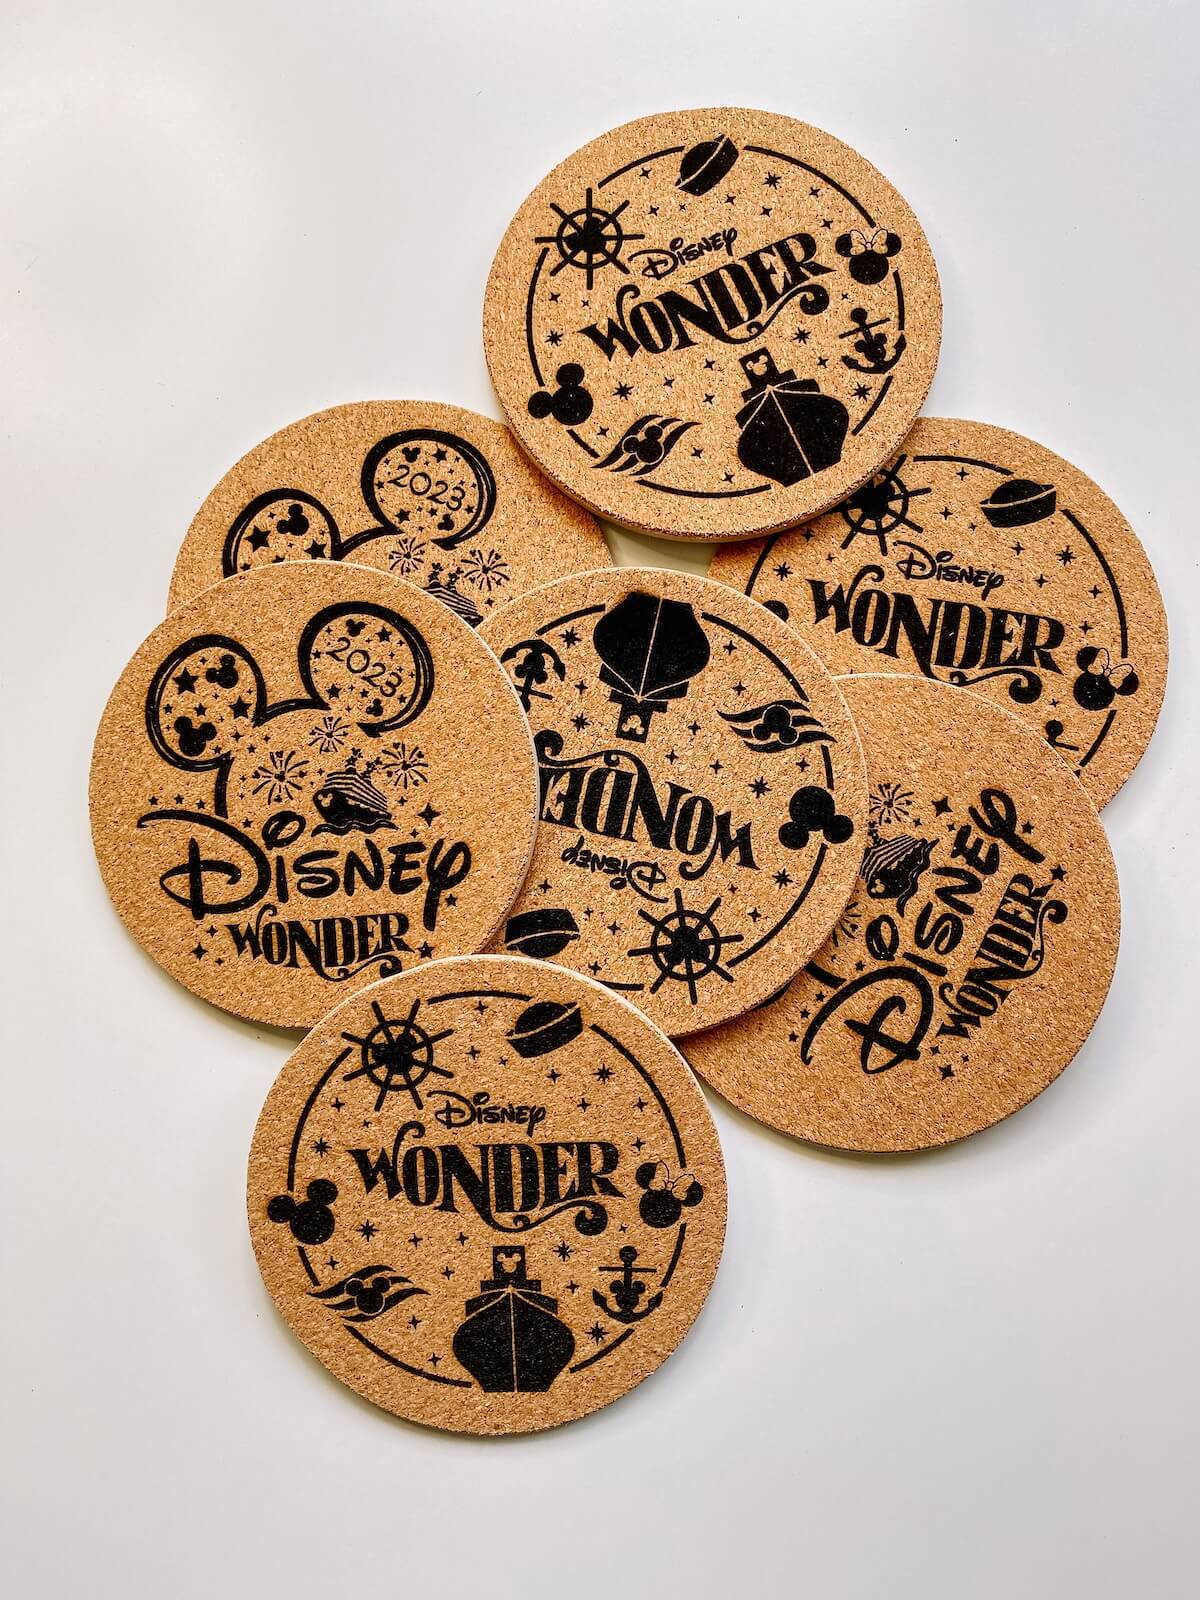 Pile of laser engraved cork coasters with disney cruise designs.